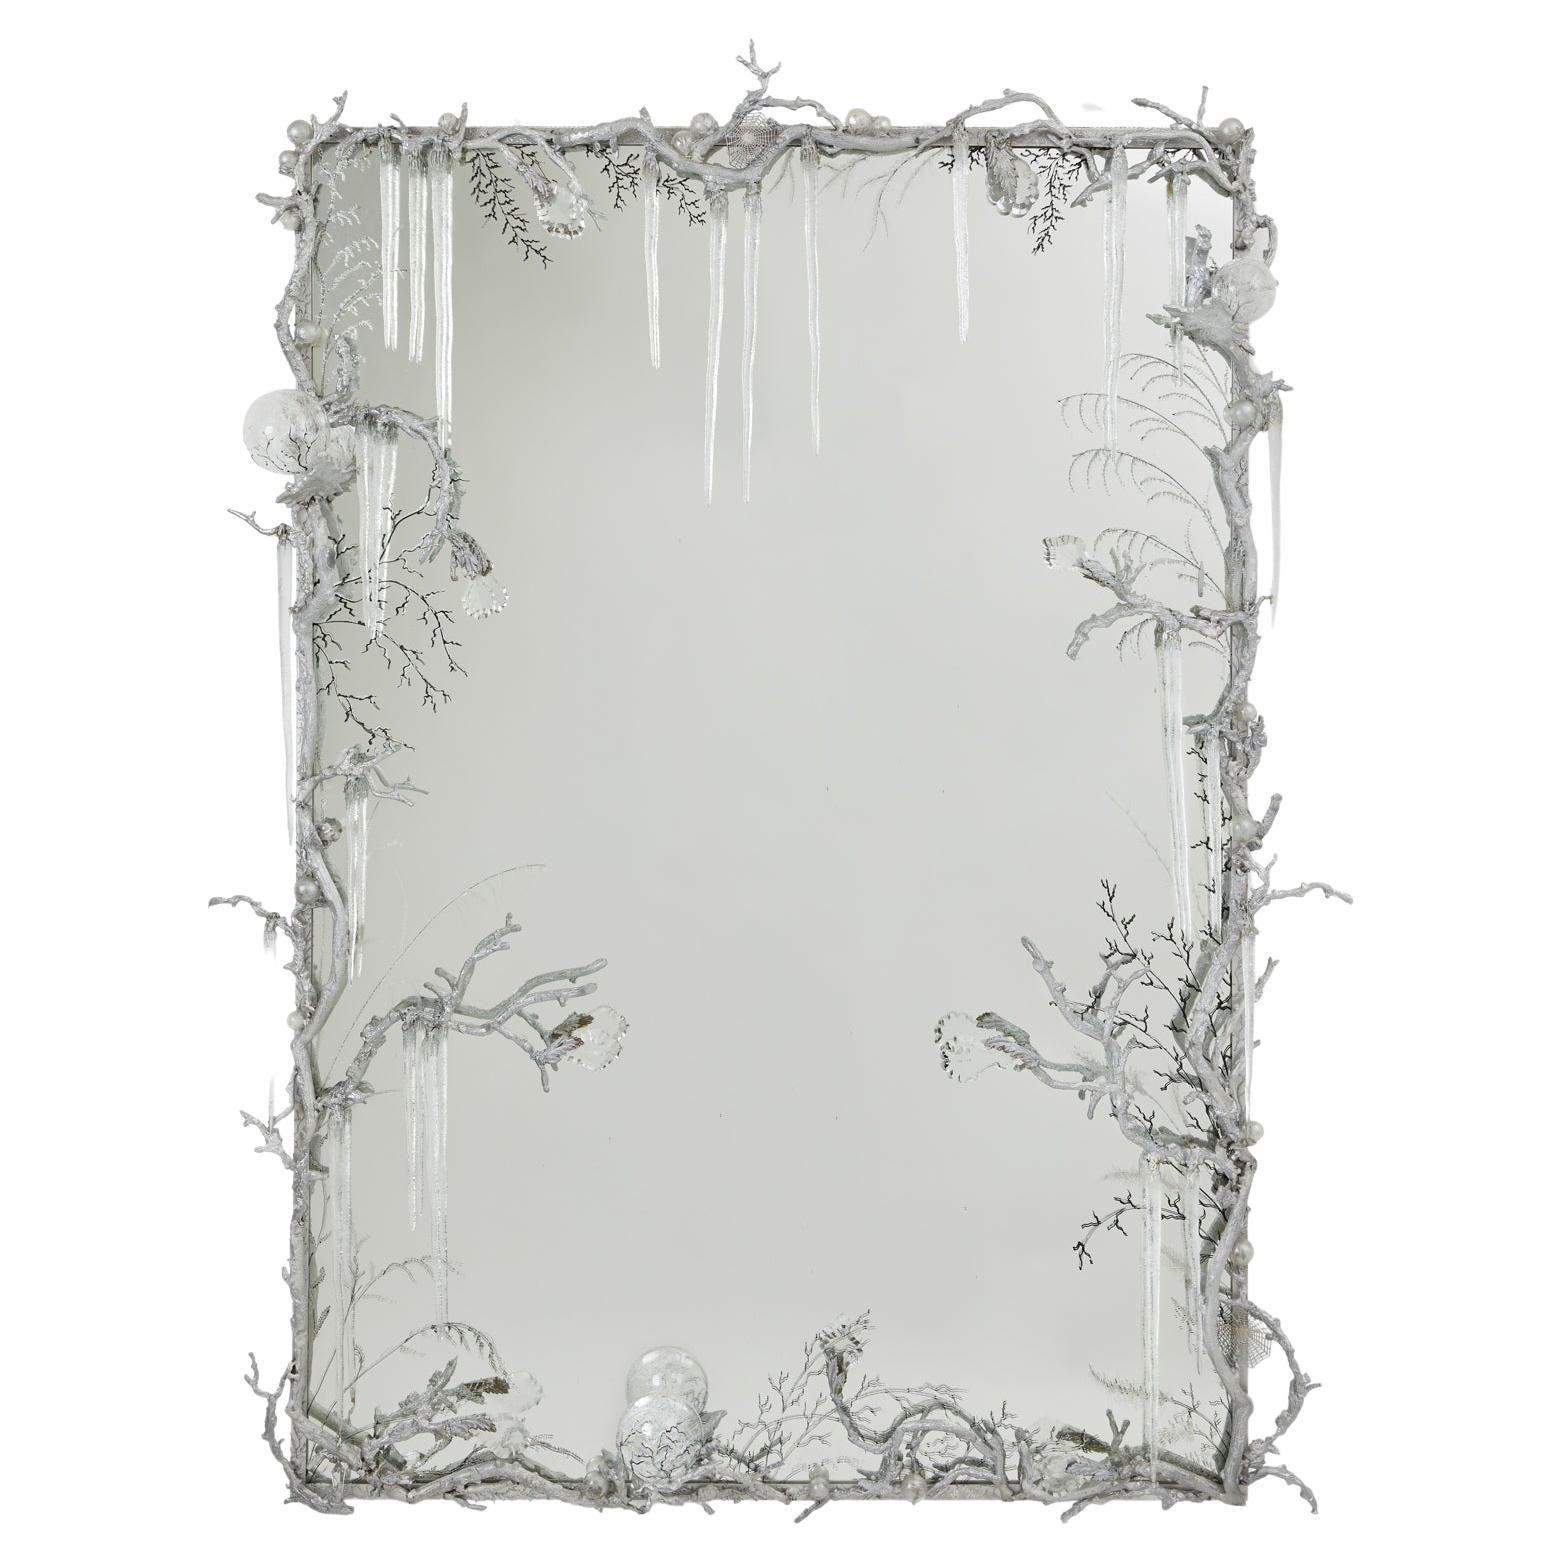 Mirror "Matin Givré" in Silvered Aluminium by Joy de Rohan Chabot For Sale